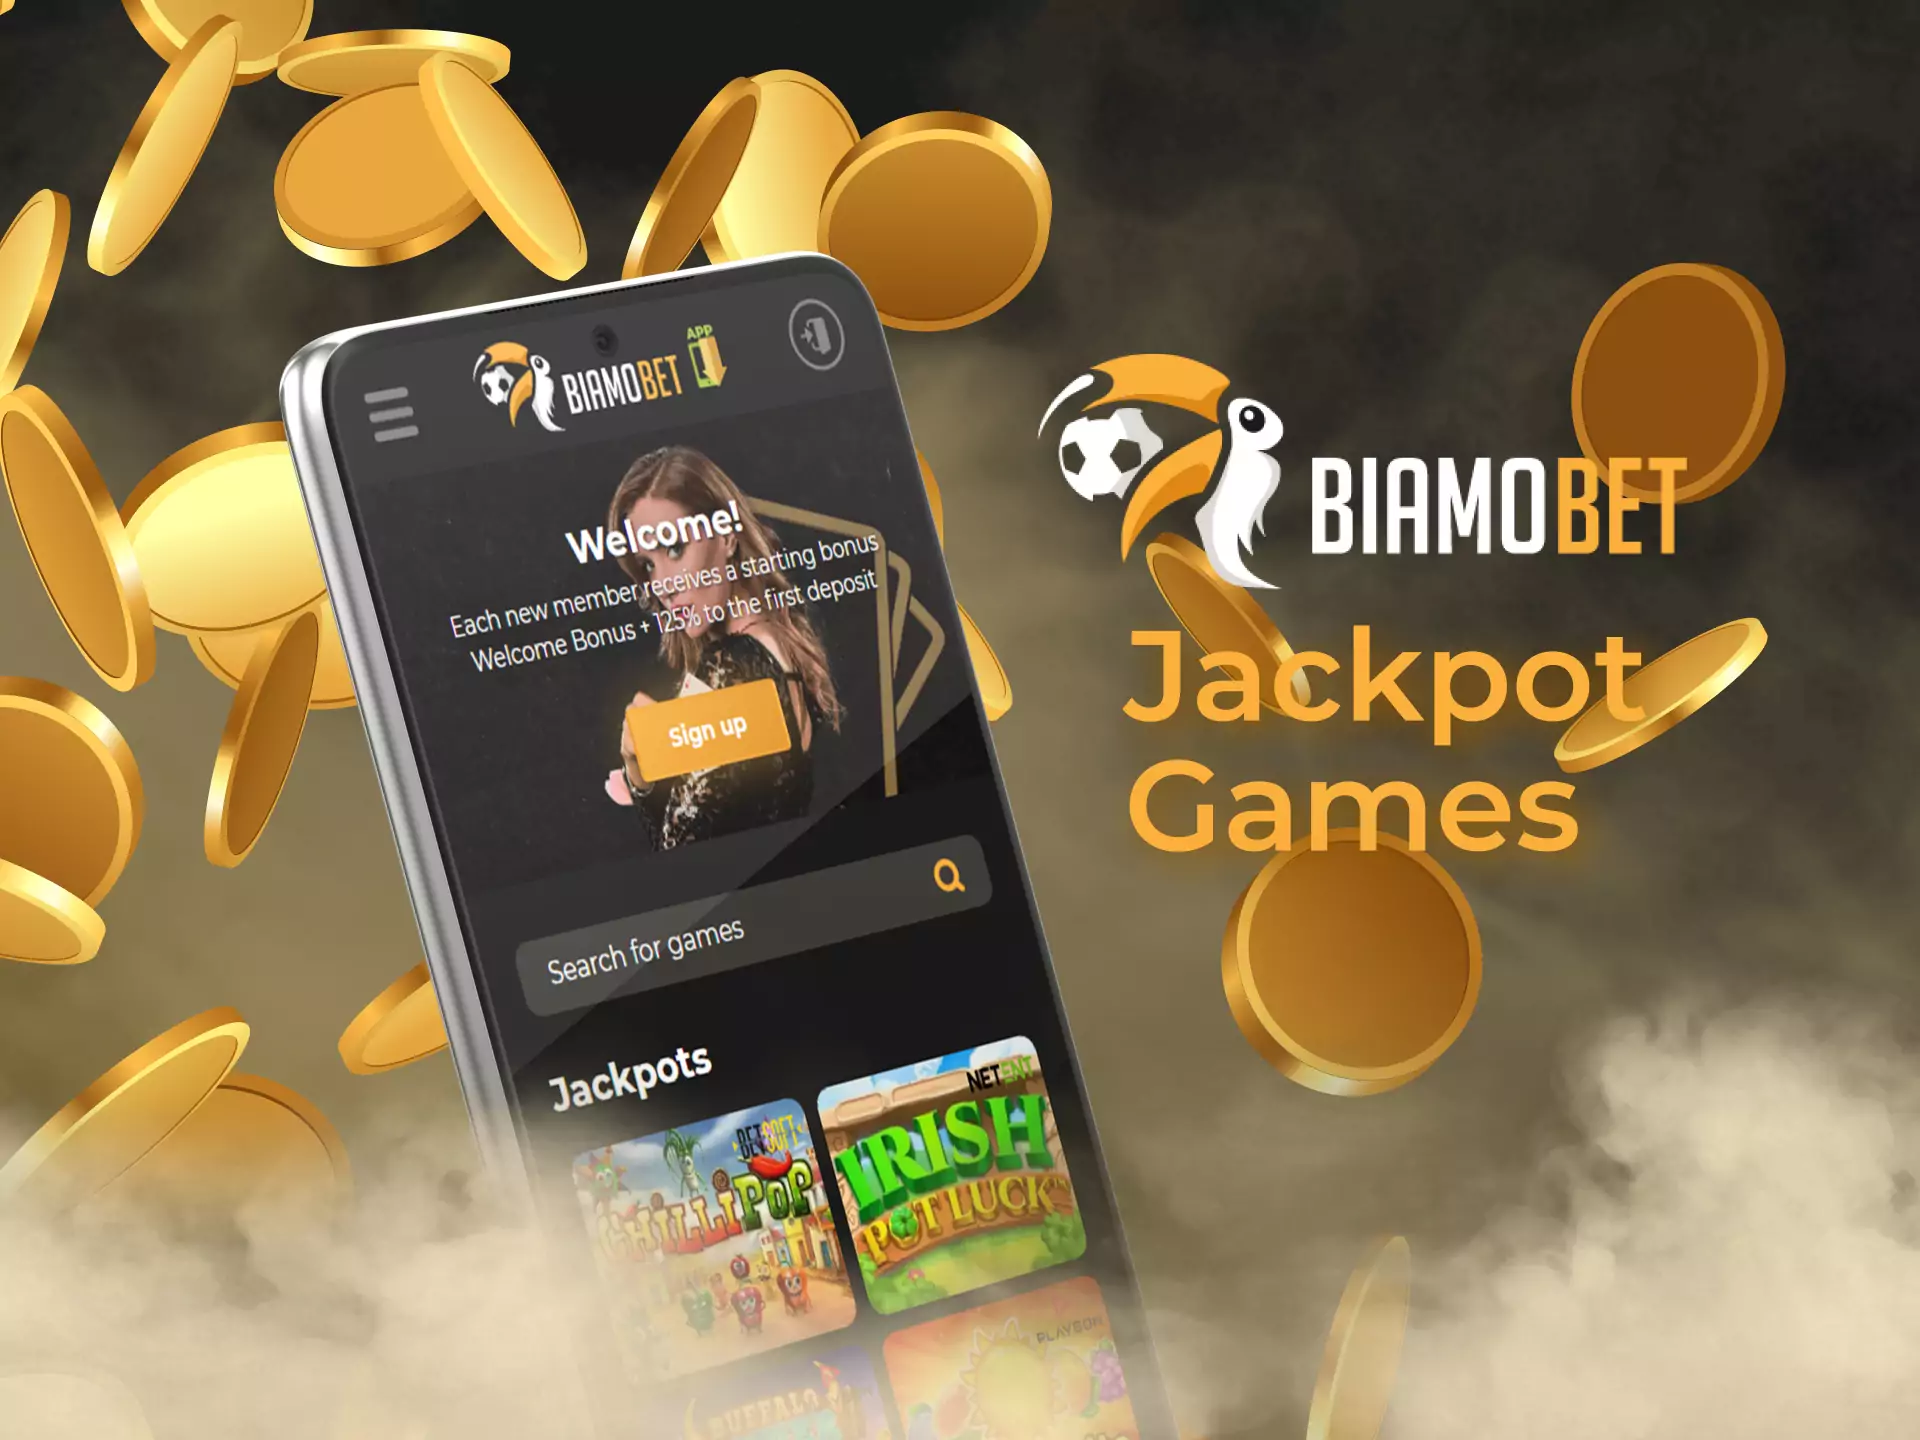 Try jackpot games and check your fortune in the Biamobet app.